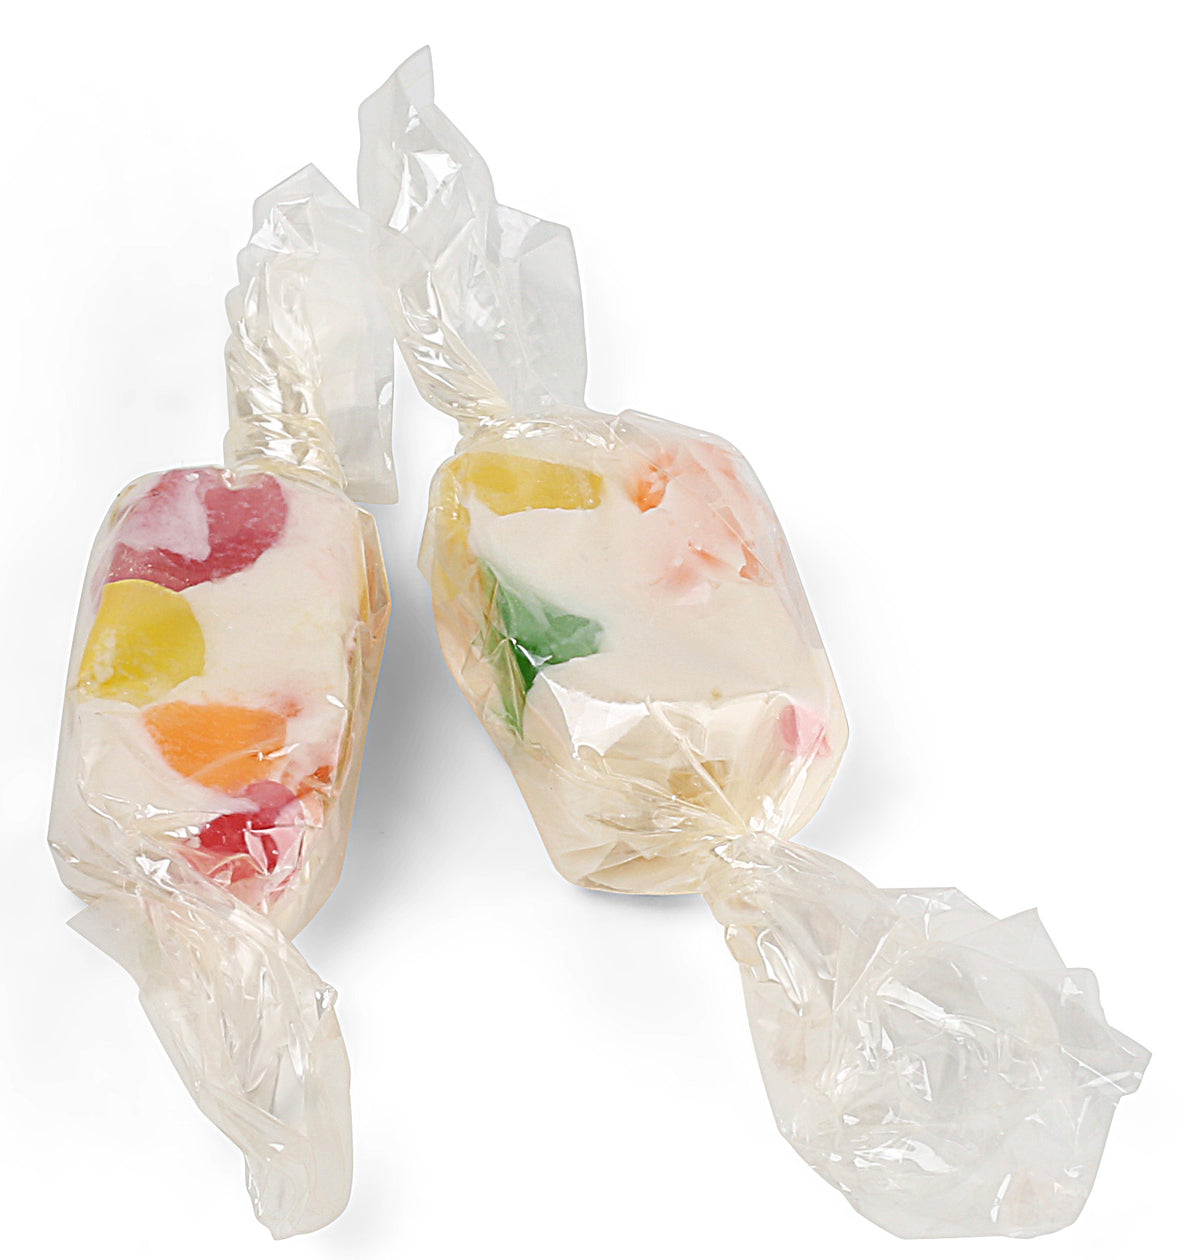 3-Pack Gift Set - Individually Wrapped Holiday Candy.